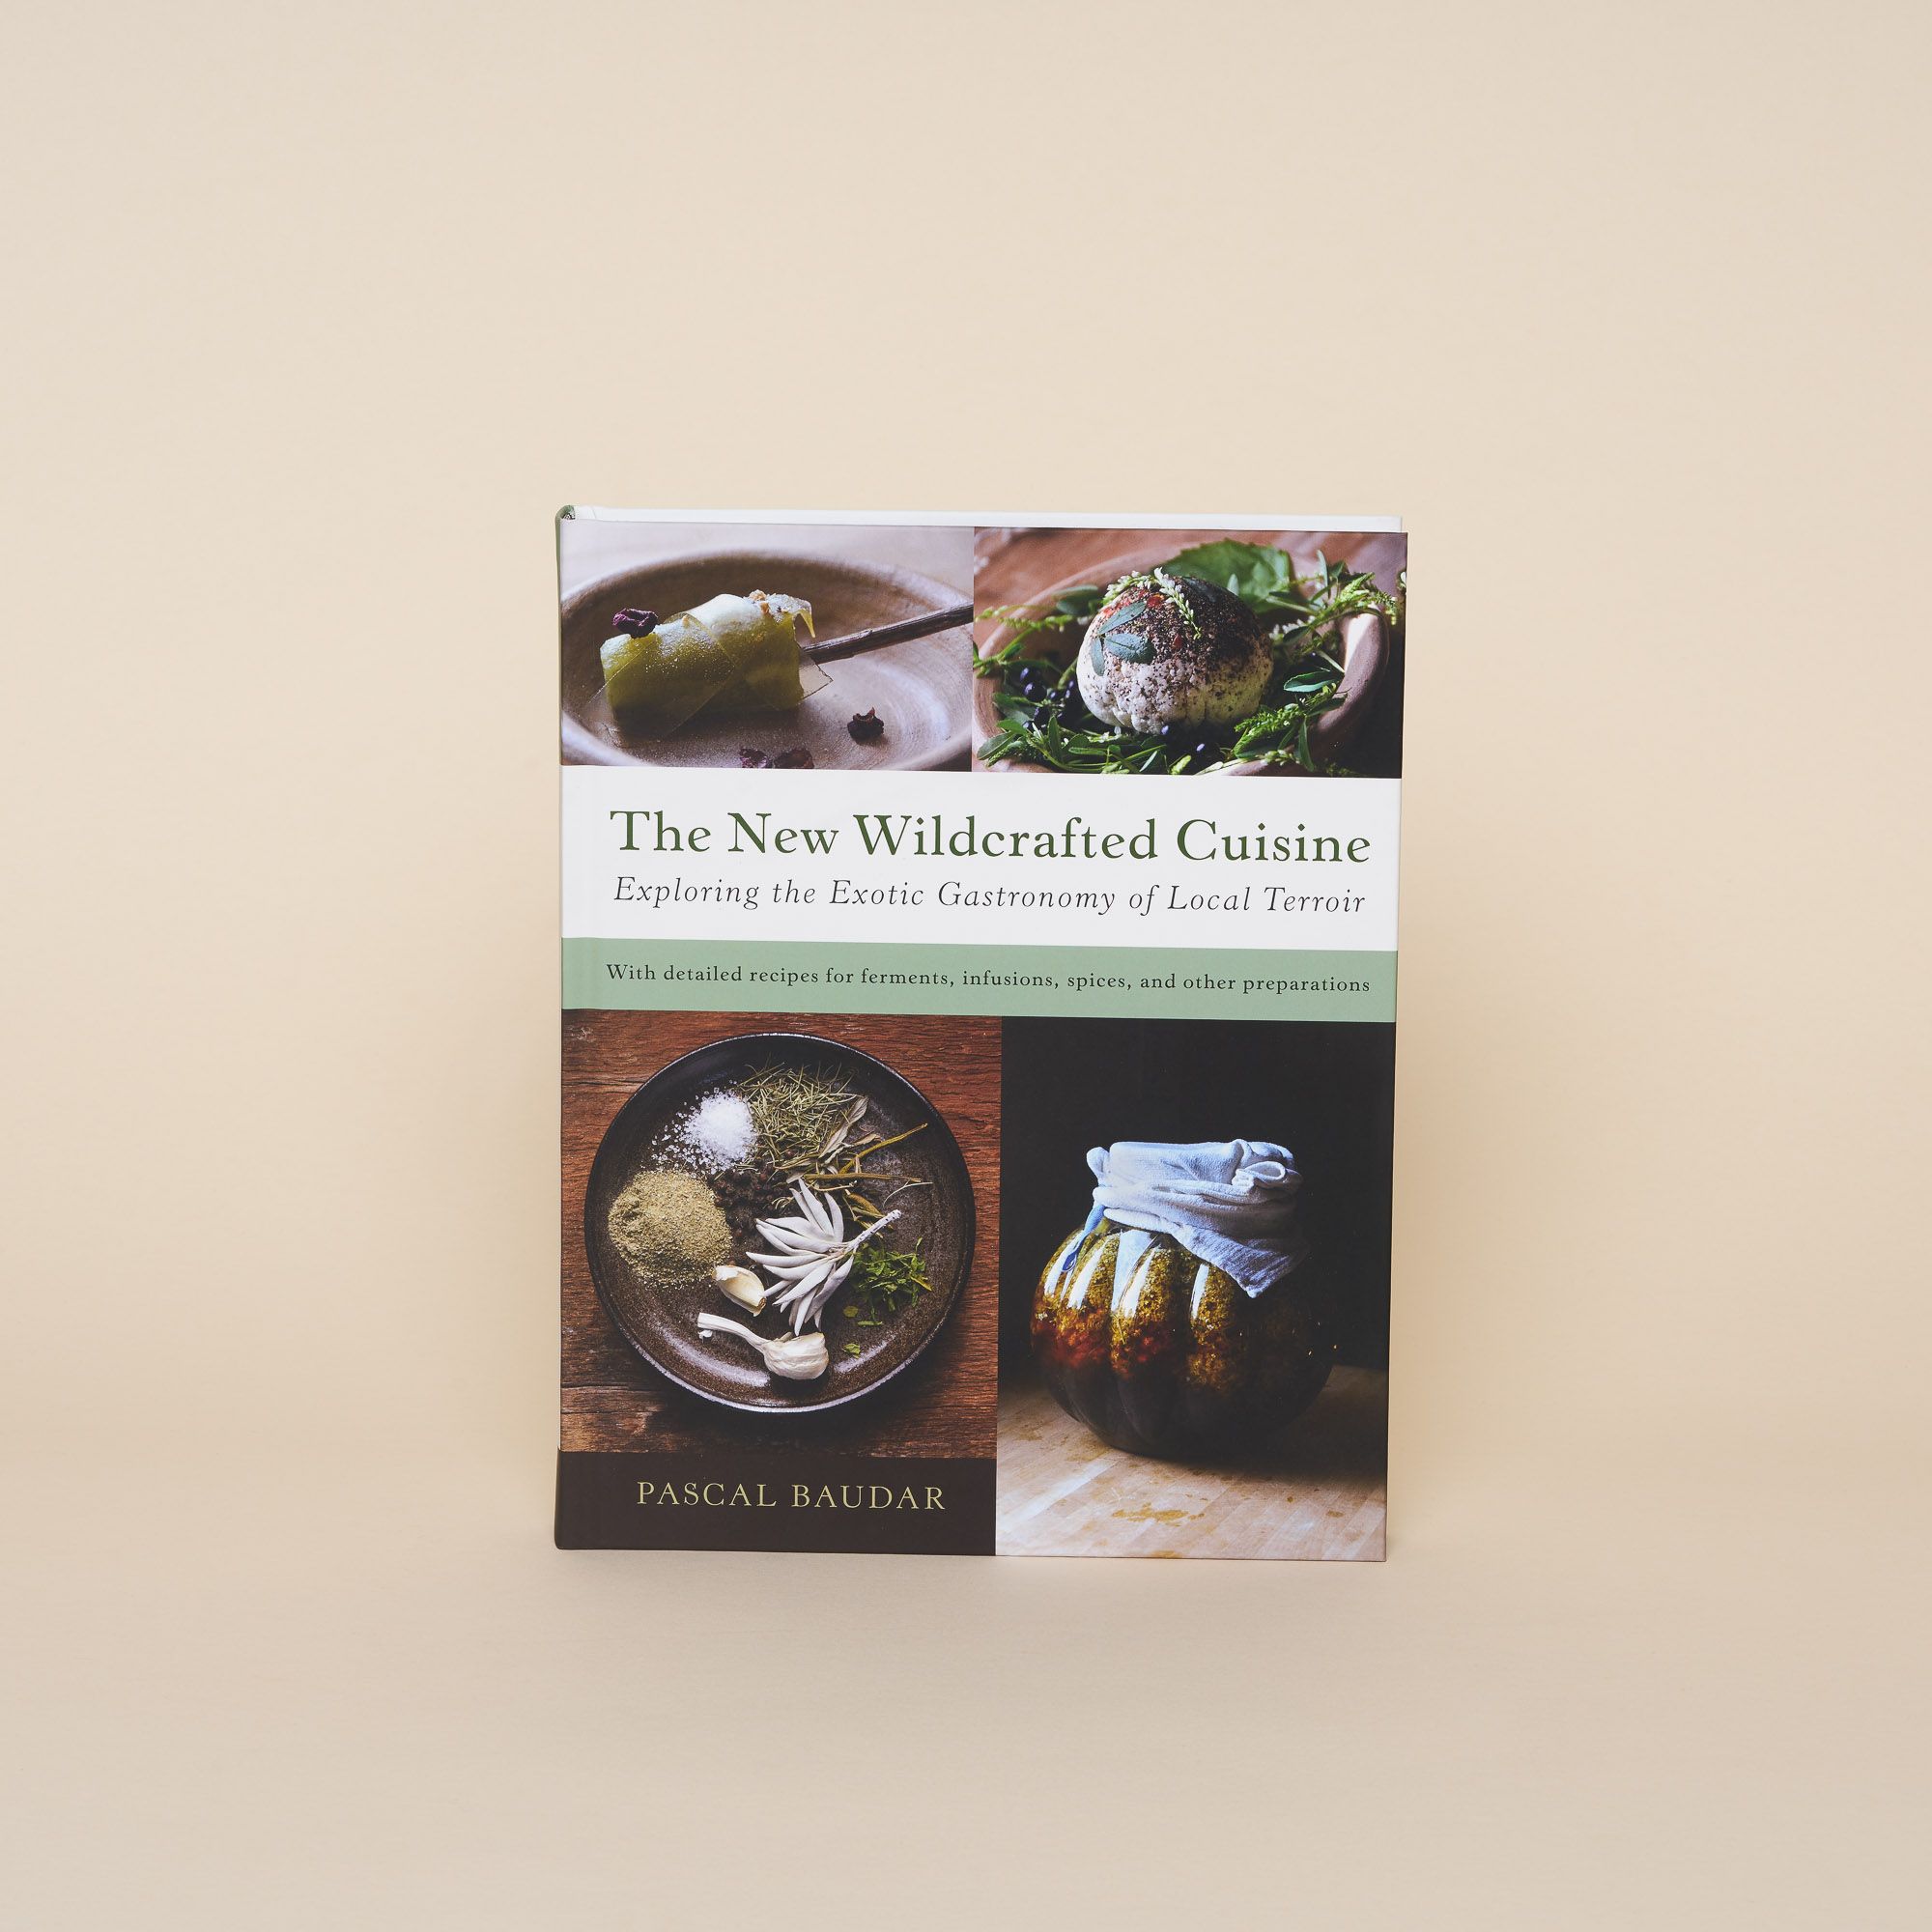 The New Wildcrafted Cuisine: Exploring the Exotic Gastronomy of Local Terroir by Pascal Baudar